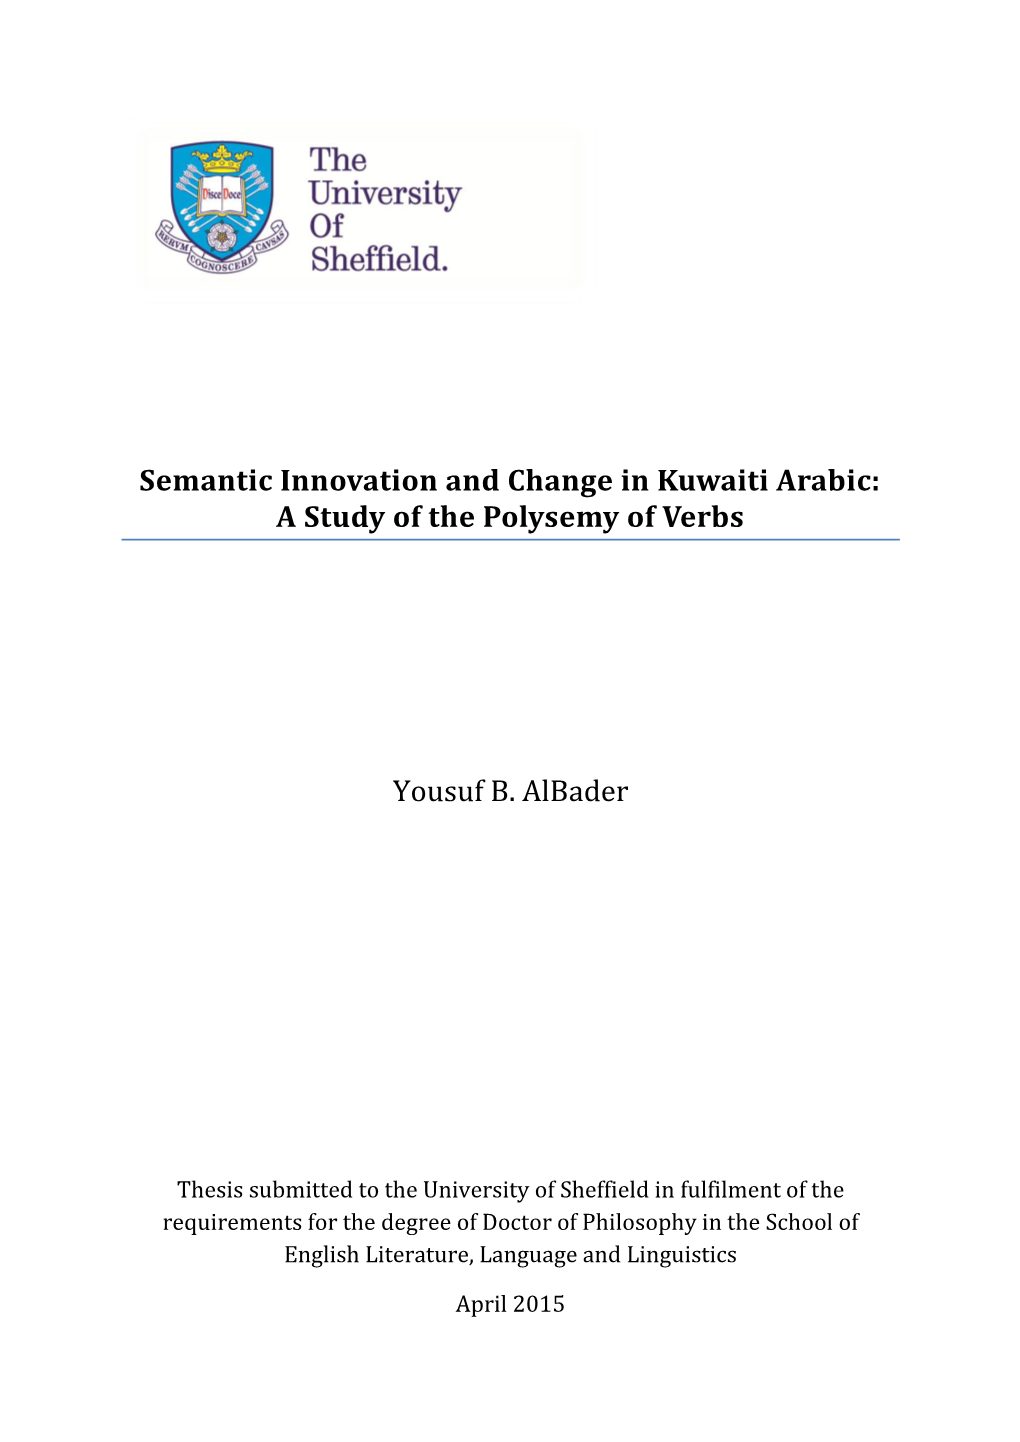 Semantic Innovation and Change in Kuwaiti Arabic: a Study of the Polysemy of Verbs